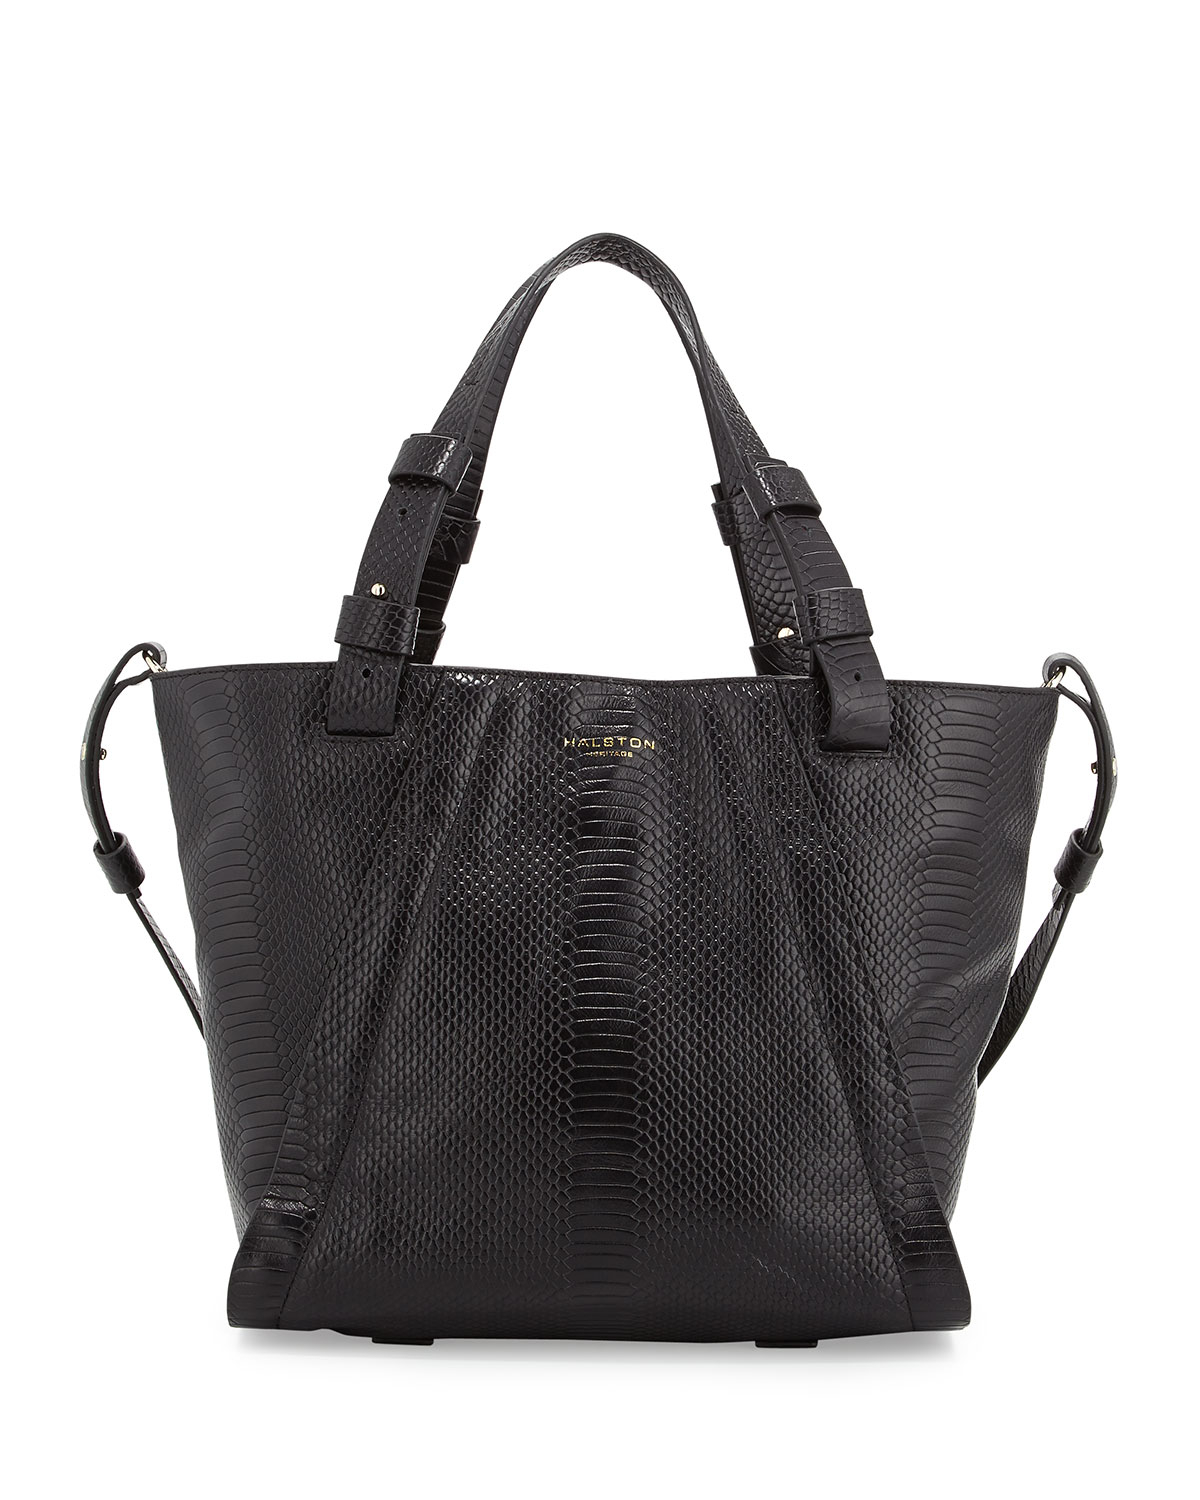 Halston heritage Liza Python-Embossed Leather Tote Bag in Black | Lyst